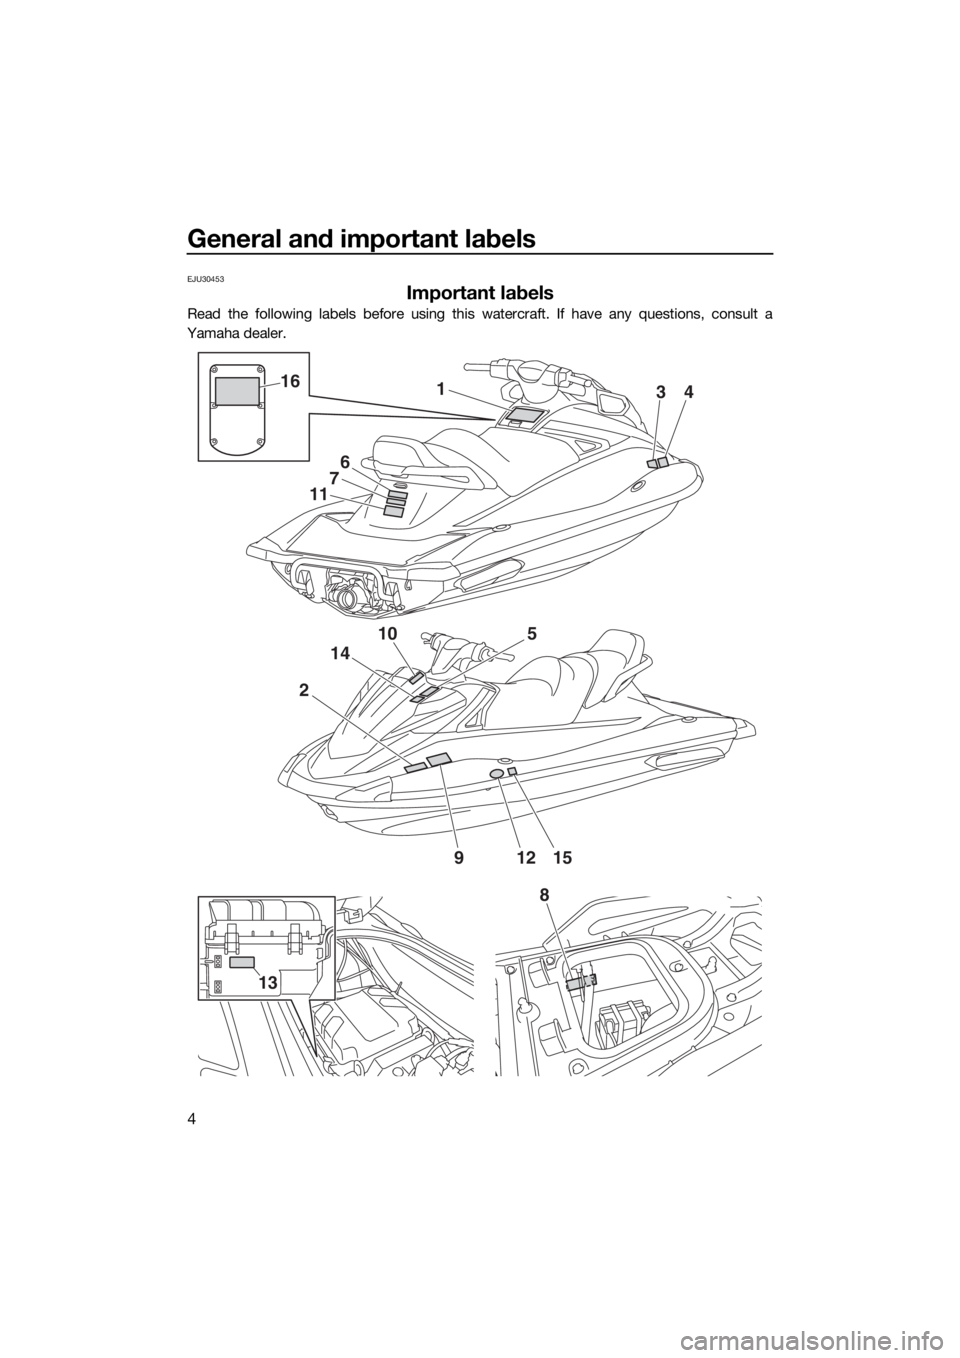 YAMAHA VX LIMITED 2018  Owners Manual General and important labels
4
EJU30453
Important labels
Read the following labels before using this watercraft. If have any questions, consult a
Yamaha dealer.
2
10
14
1
6
7
11
34
5
91512
16
8
13
UF4